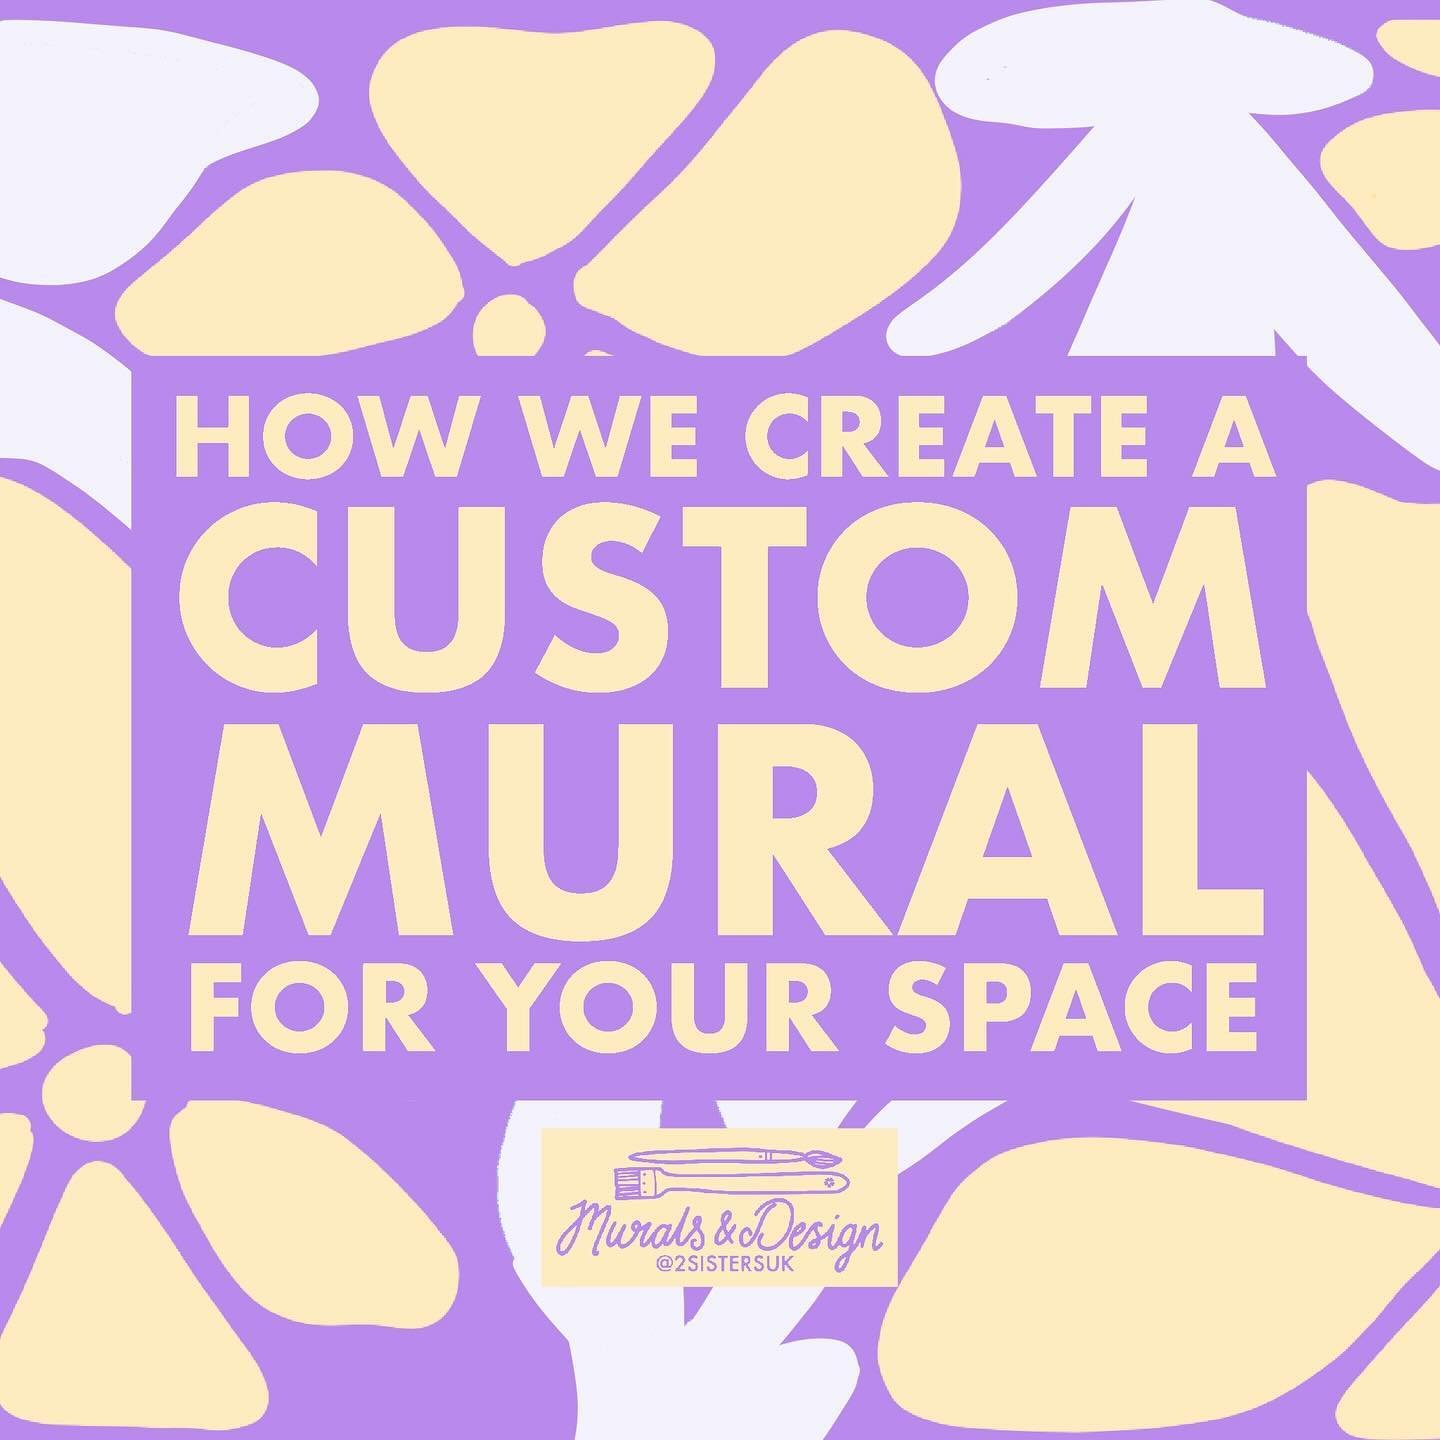 Getting a custom mural may be easier than you think! We make the process as easy as possible for our clients, with just a few simple steps to help you achieve your goals and create a beautiful piece for your space 🌻